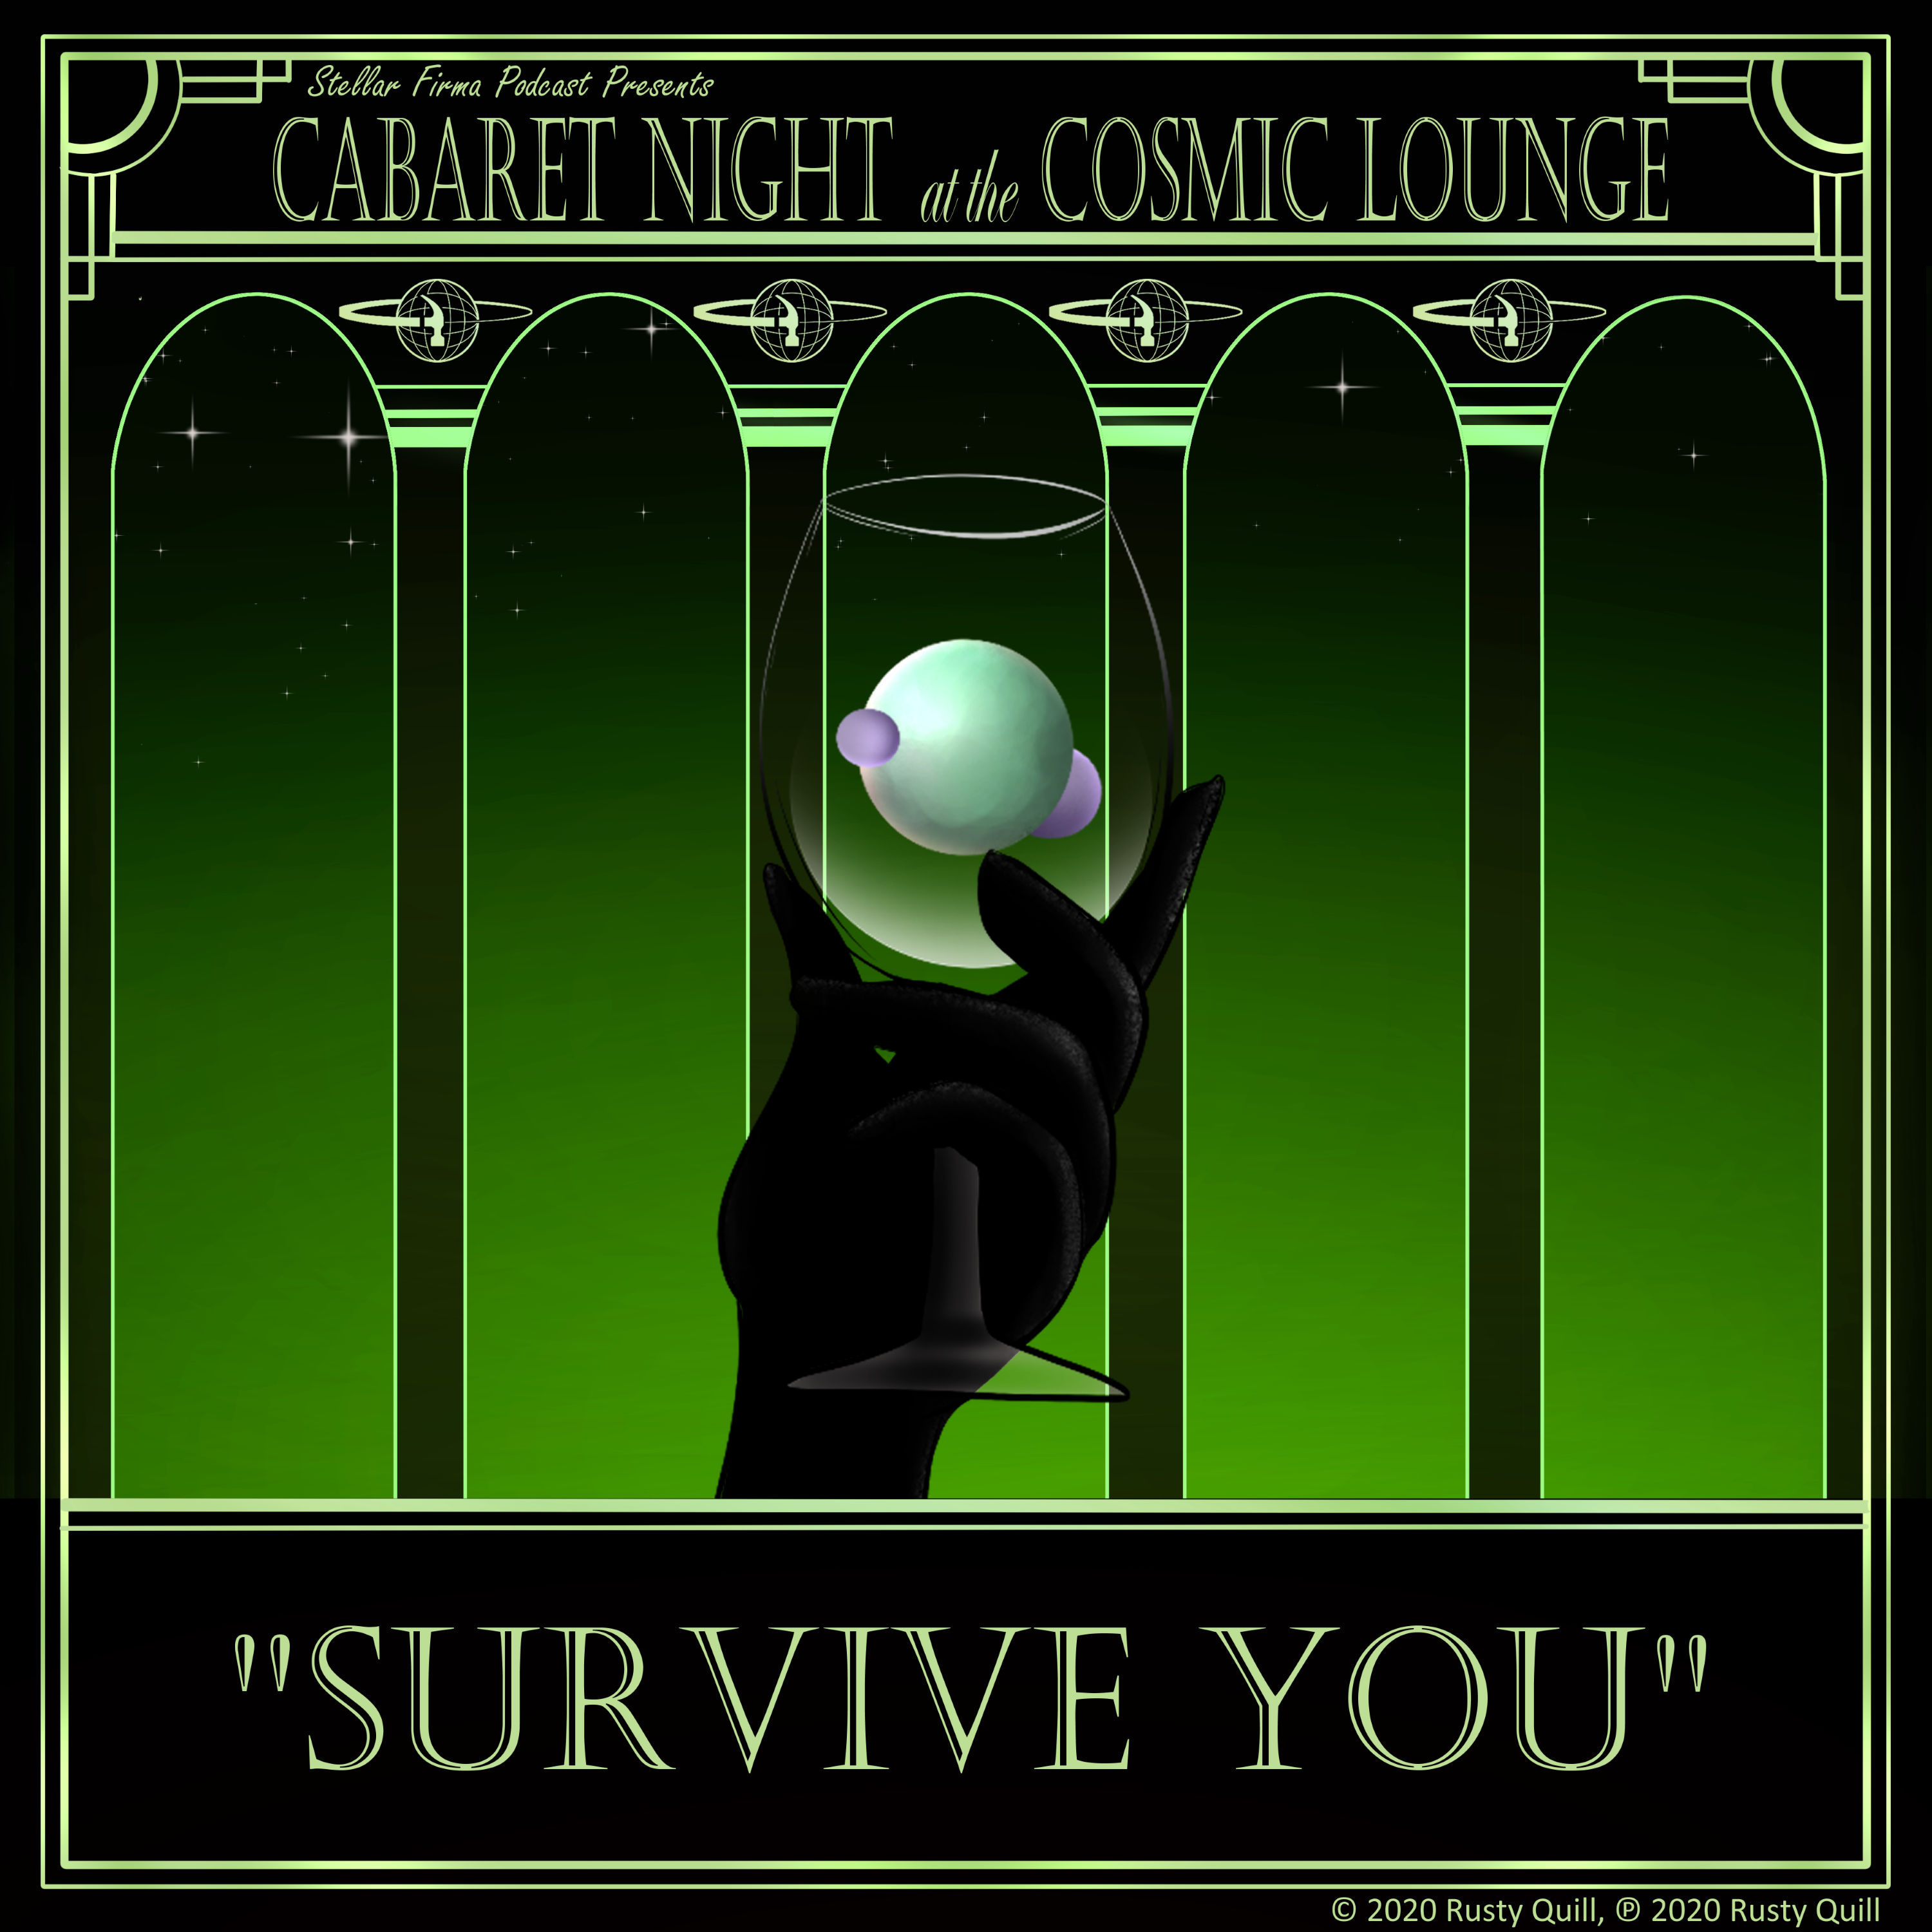 Cabaret Night at the Cosmic Lounge: Survive You